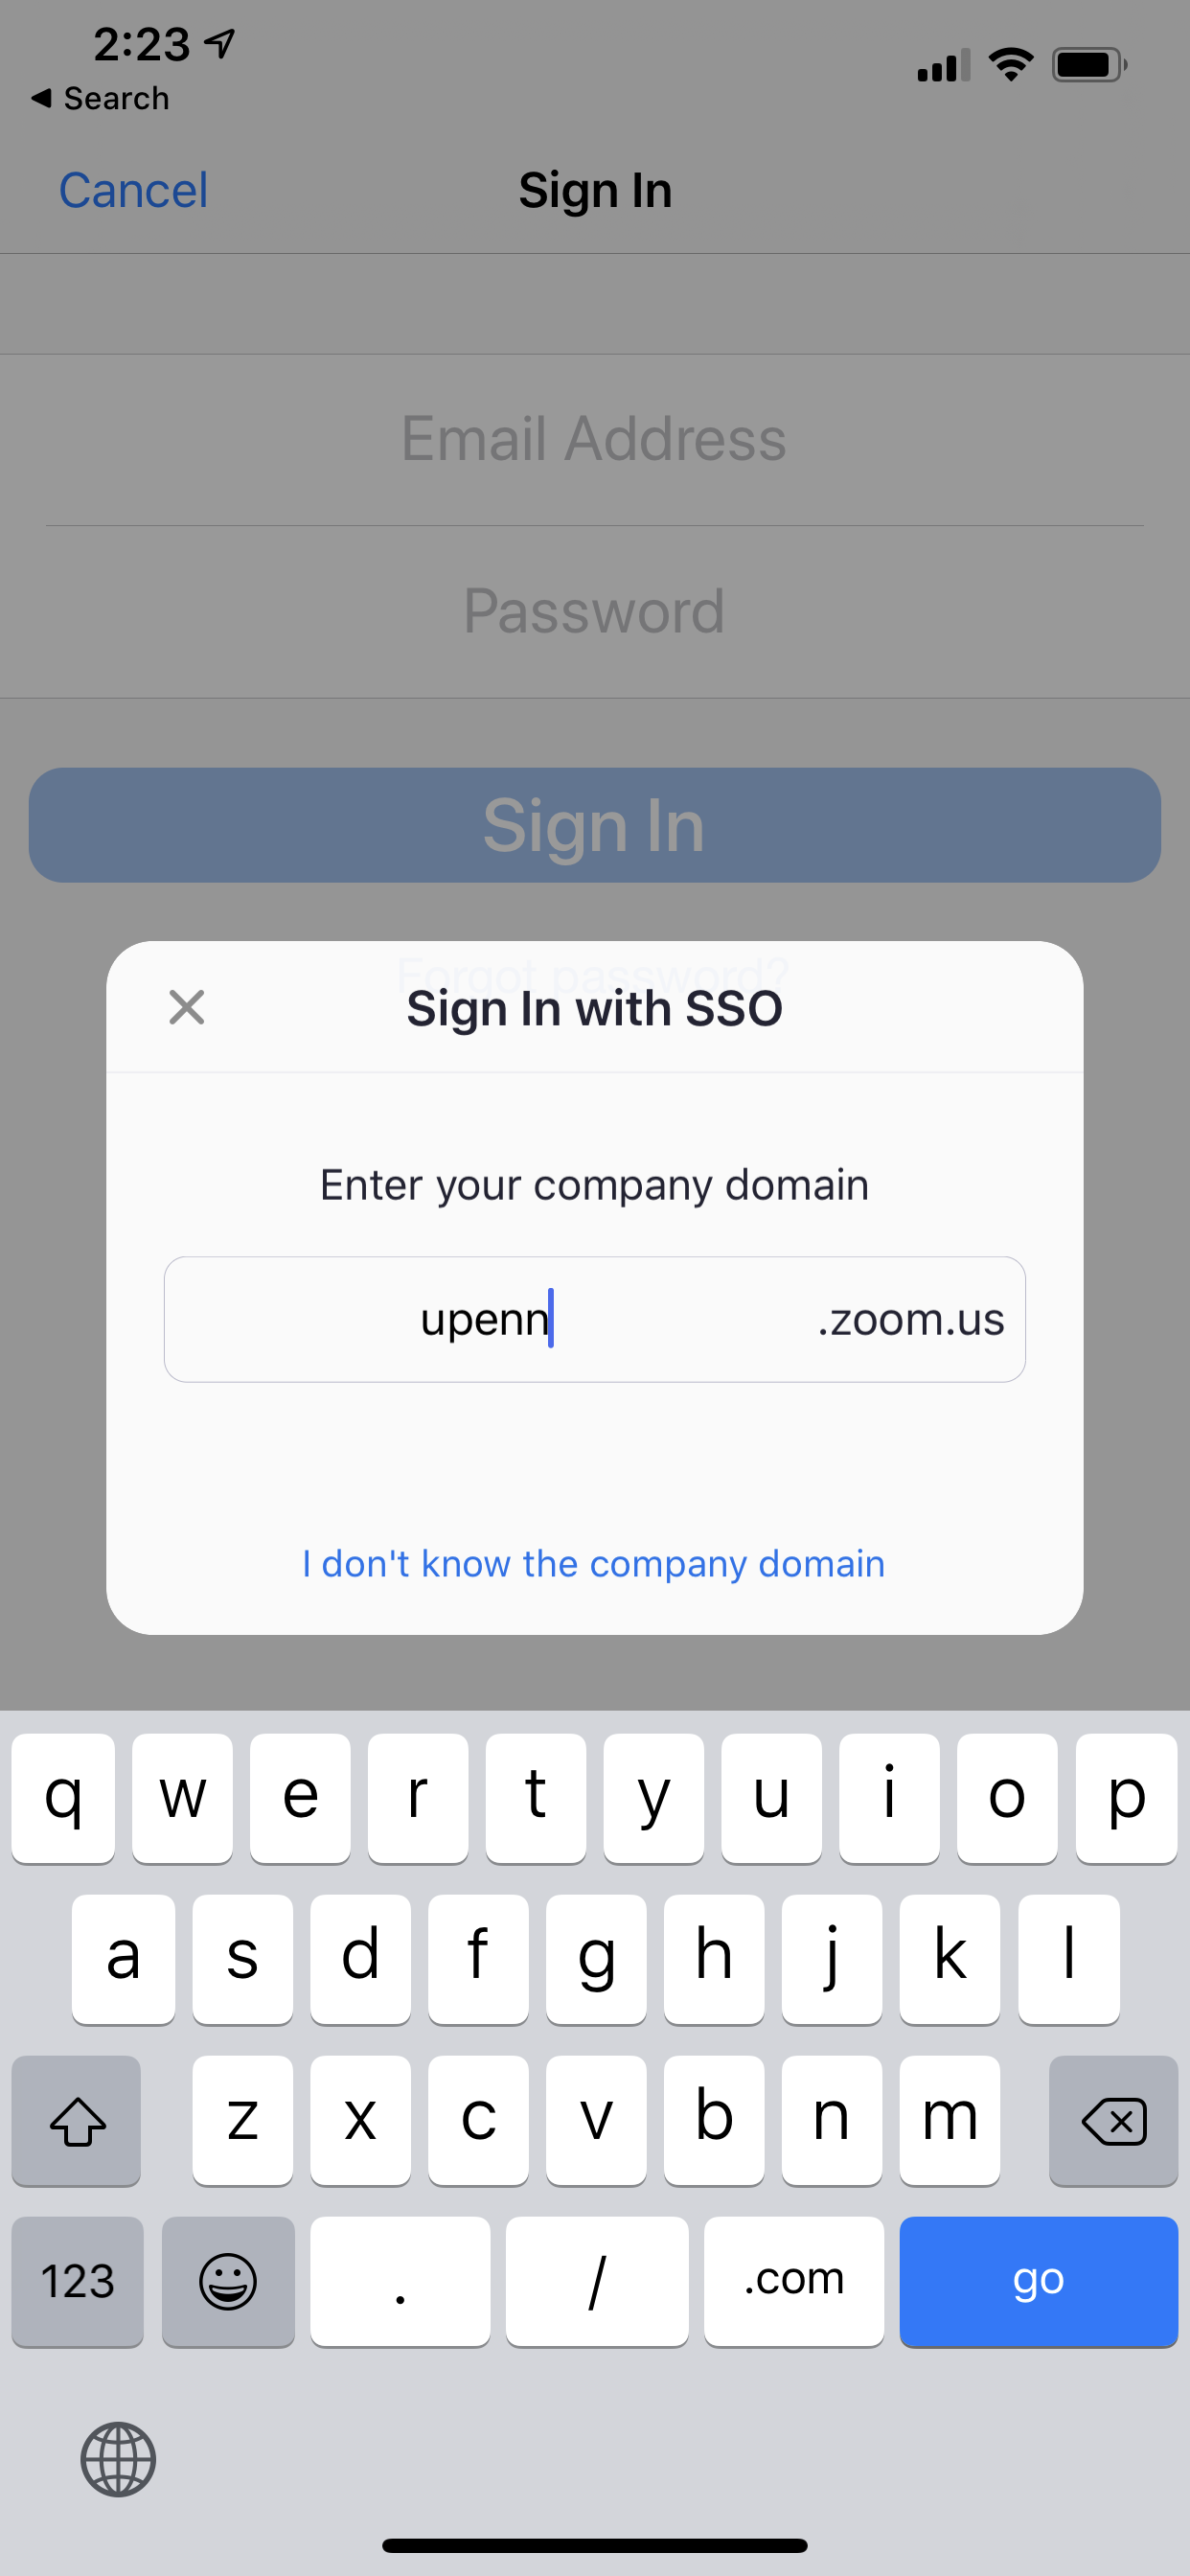 Zoom app Sign In with SSO screen with 